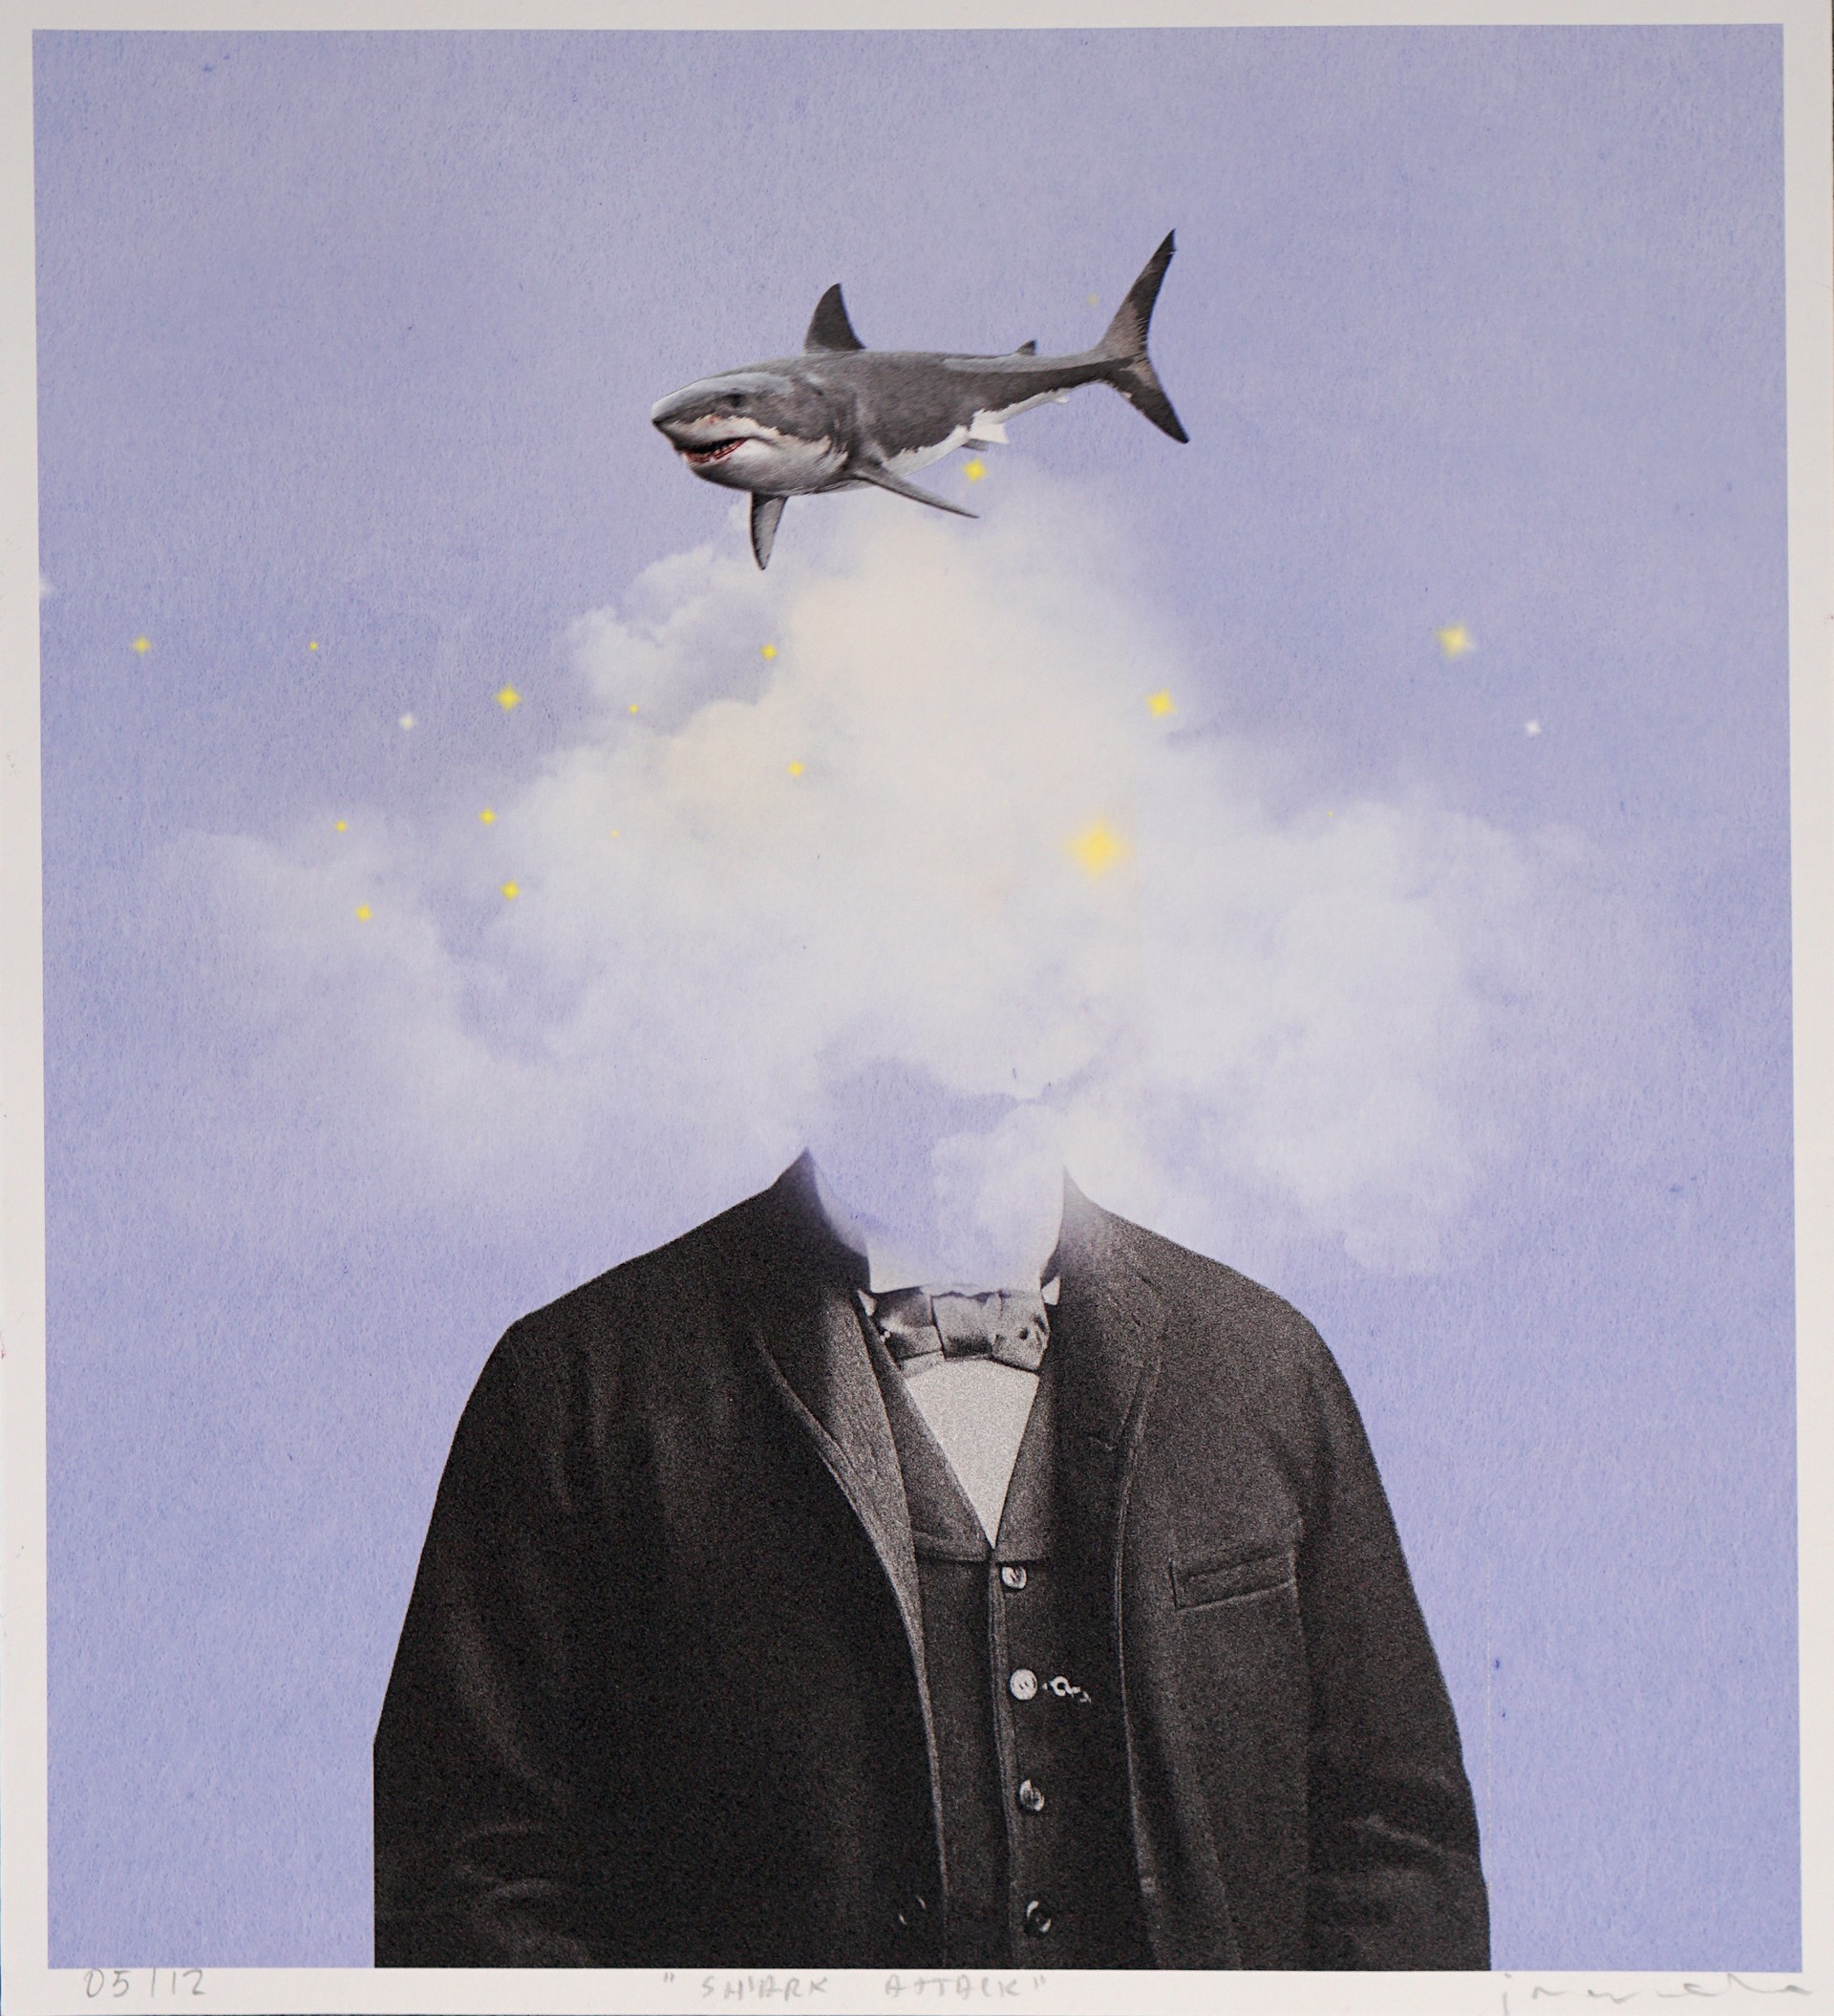 Sharks Won't Attack, They Are Only In Your Head by J Mateo Cabrera